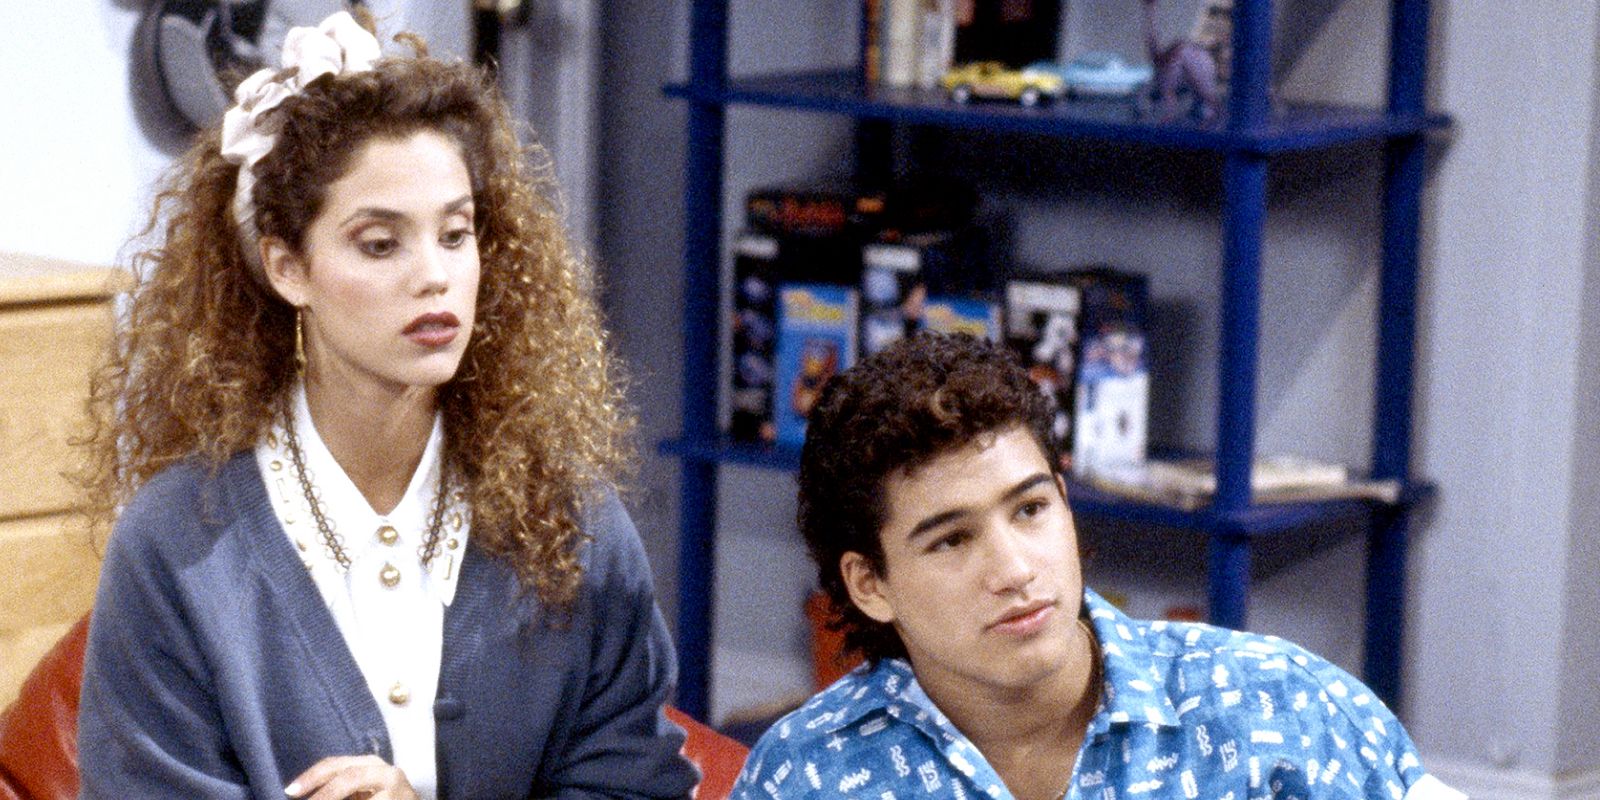 Jessie And Slater In Saved By The Bell